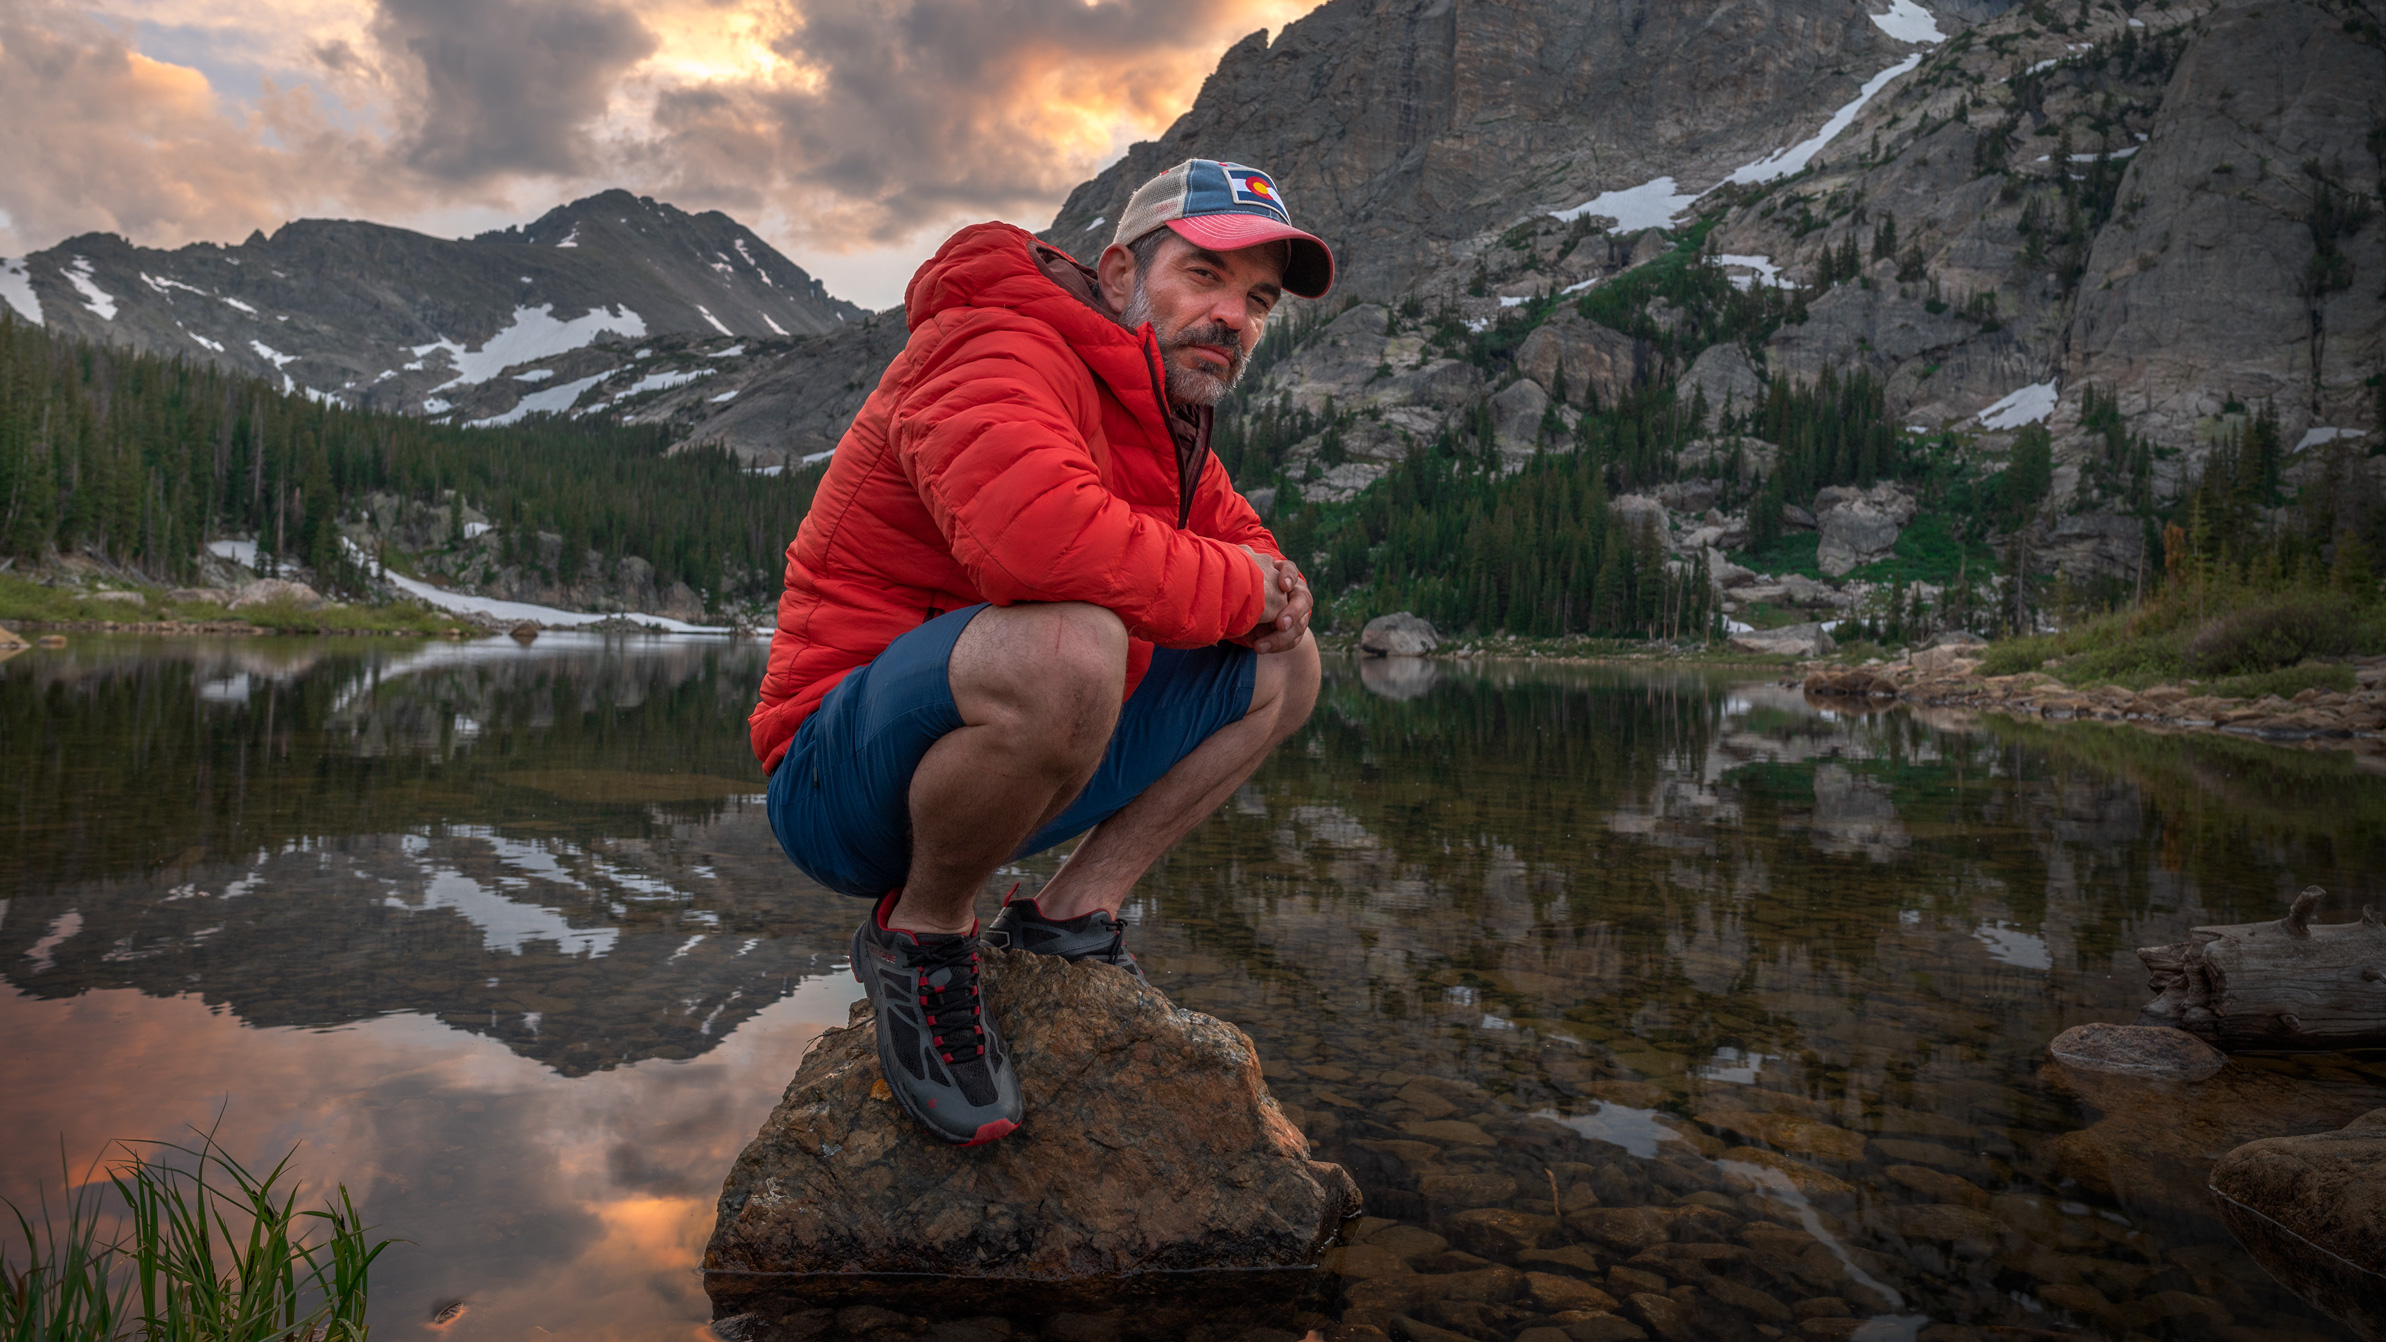 Dave Spates squatting on a rock in Pear Lake, Rocky Mountain National Park Colorado USA during sunset